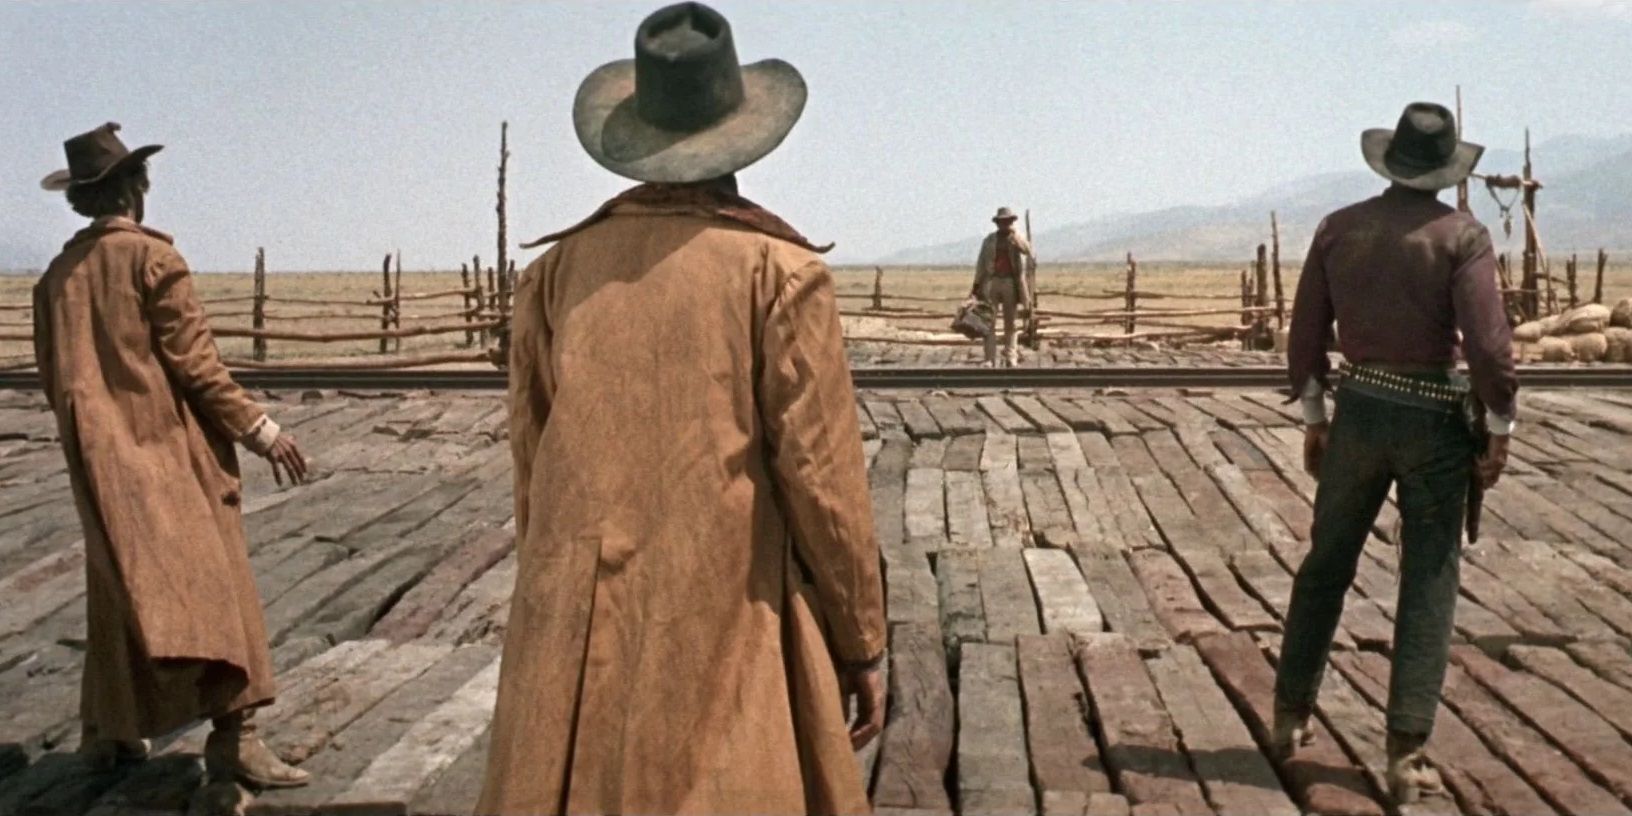 Three gunmen at a train station in the opening scene of Once Upon a Time in the West